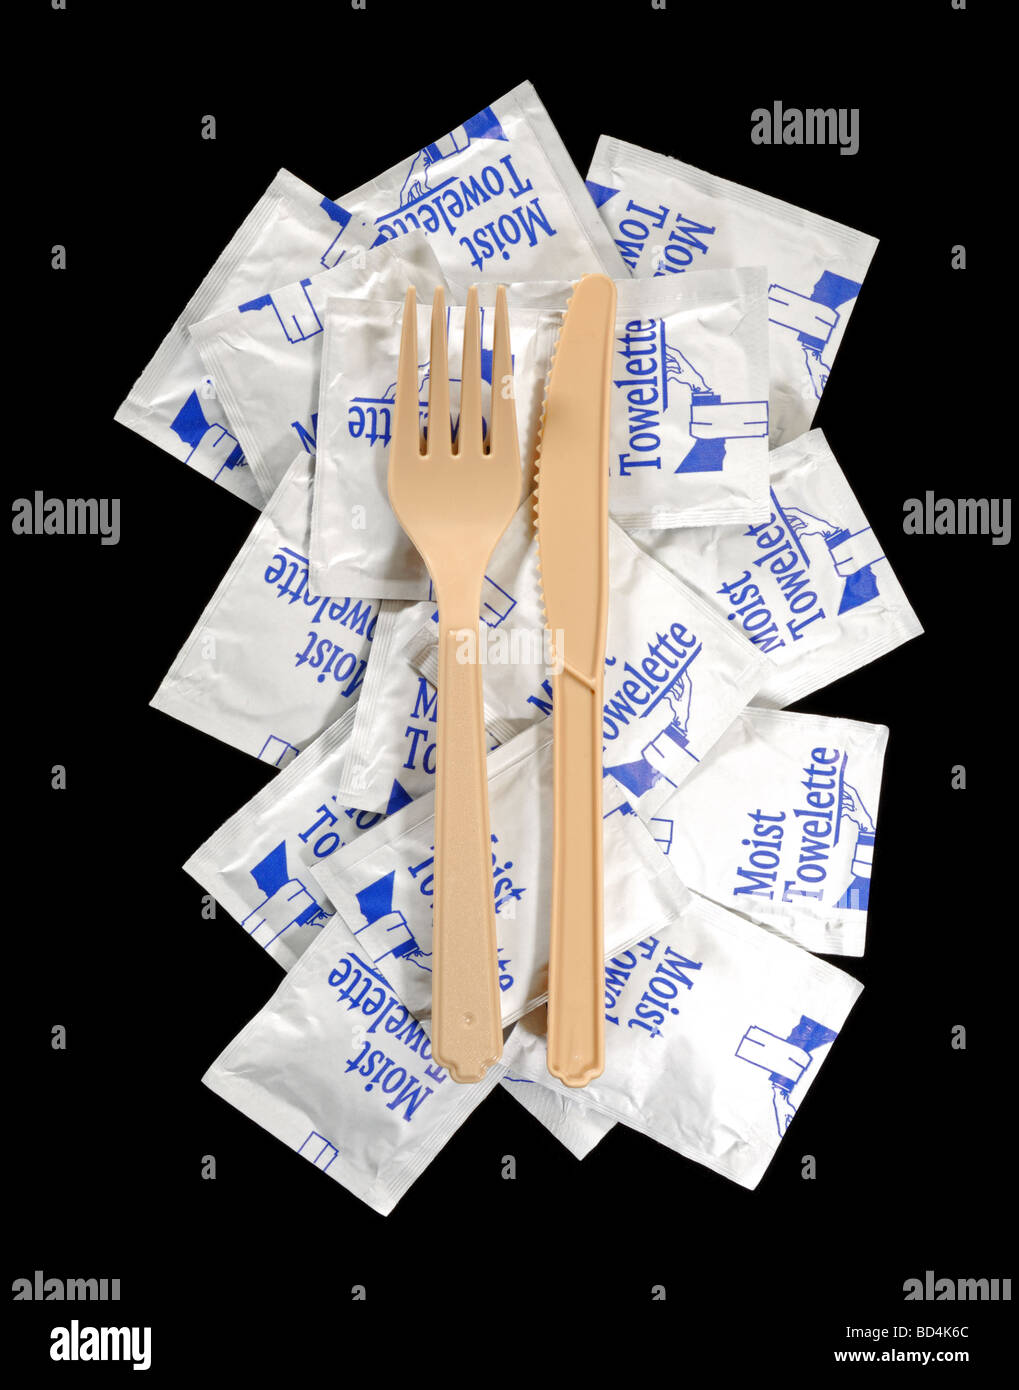 Many moist towelettes with a plastic knife and fork Stock Photo